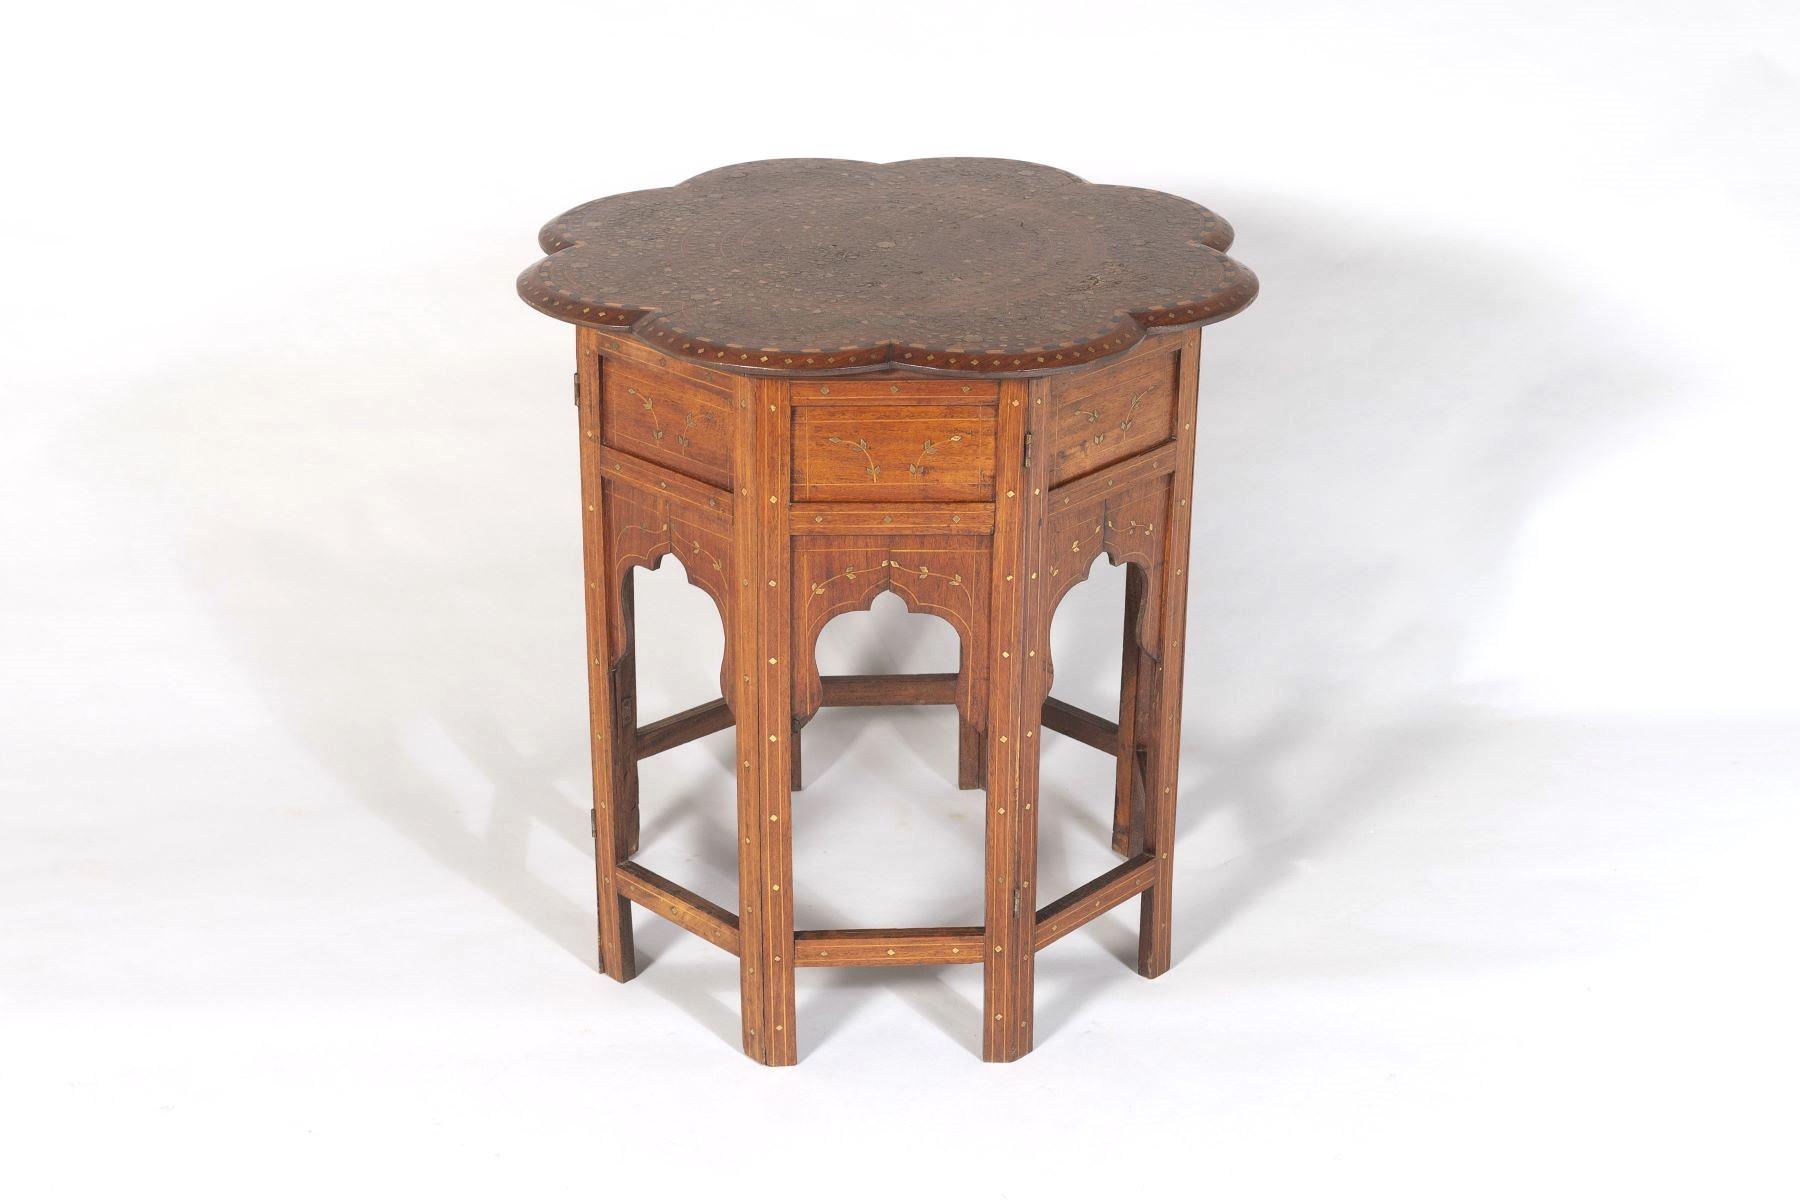 A superbly decorated late 19th Century Hoshiarpur occasional table from British India.  Teak with intense brass inlay filigree top, an unusual flower shape top makes this piece much more desirable, the top also features a fruitwood and ebony chevron